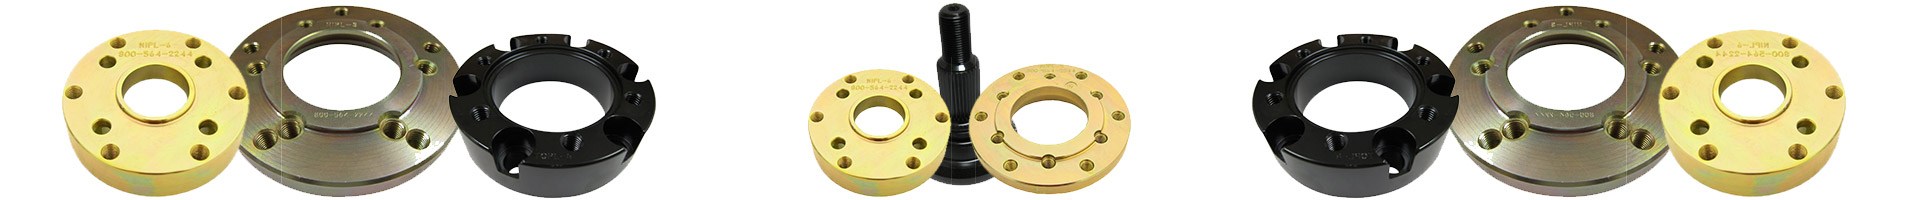 Axle Conversion Parts Category Page Image